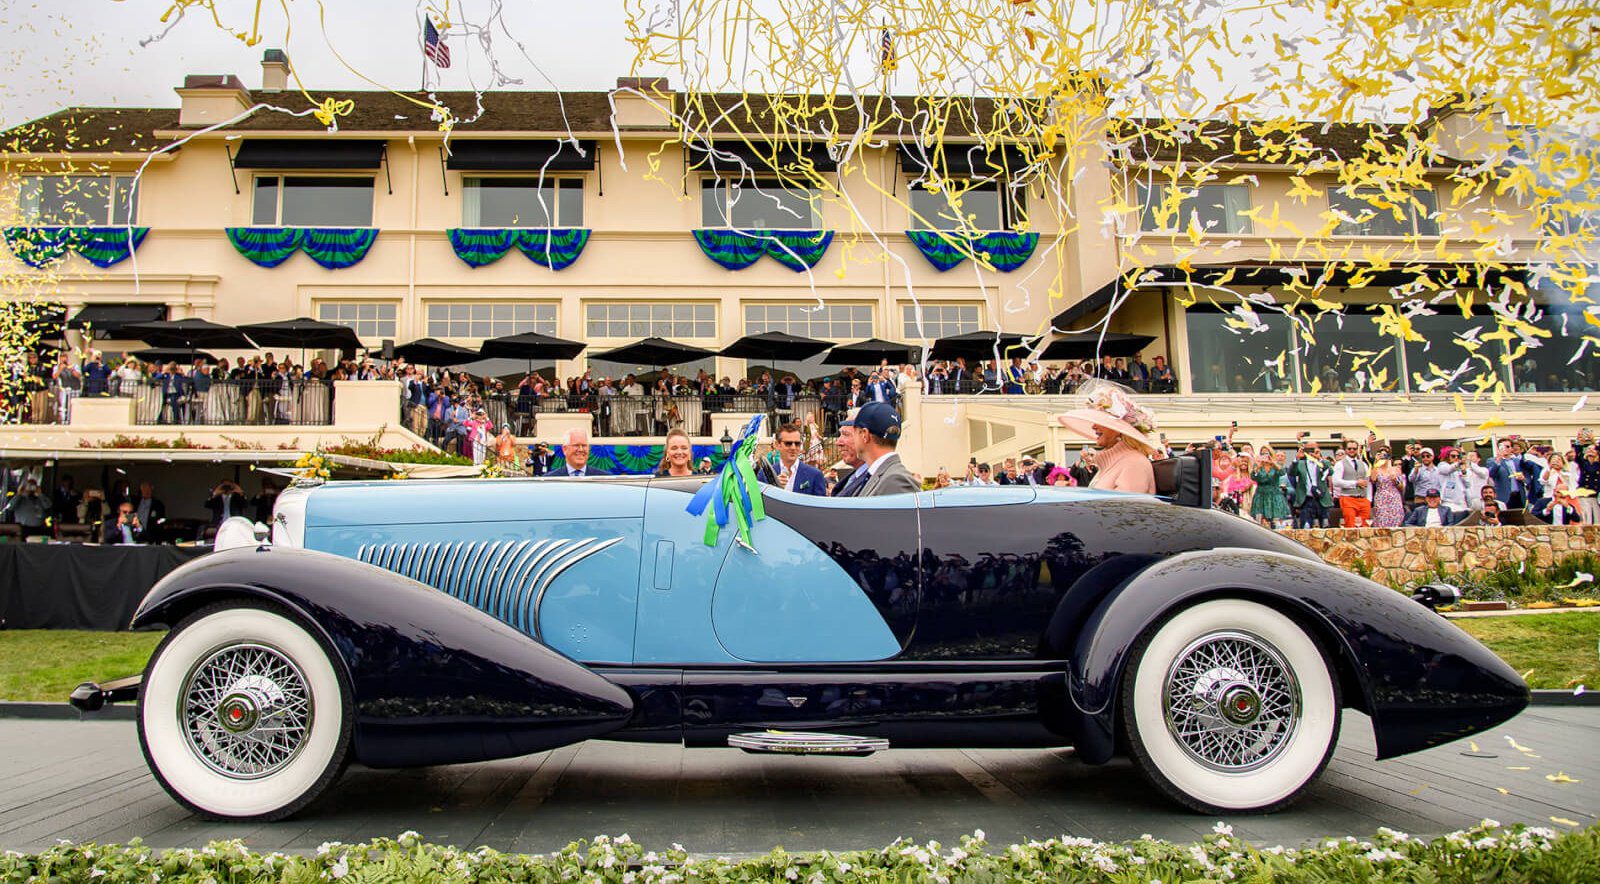 A day at Pebble Beach Concours d'elegance